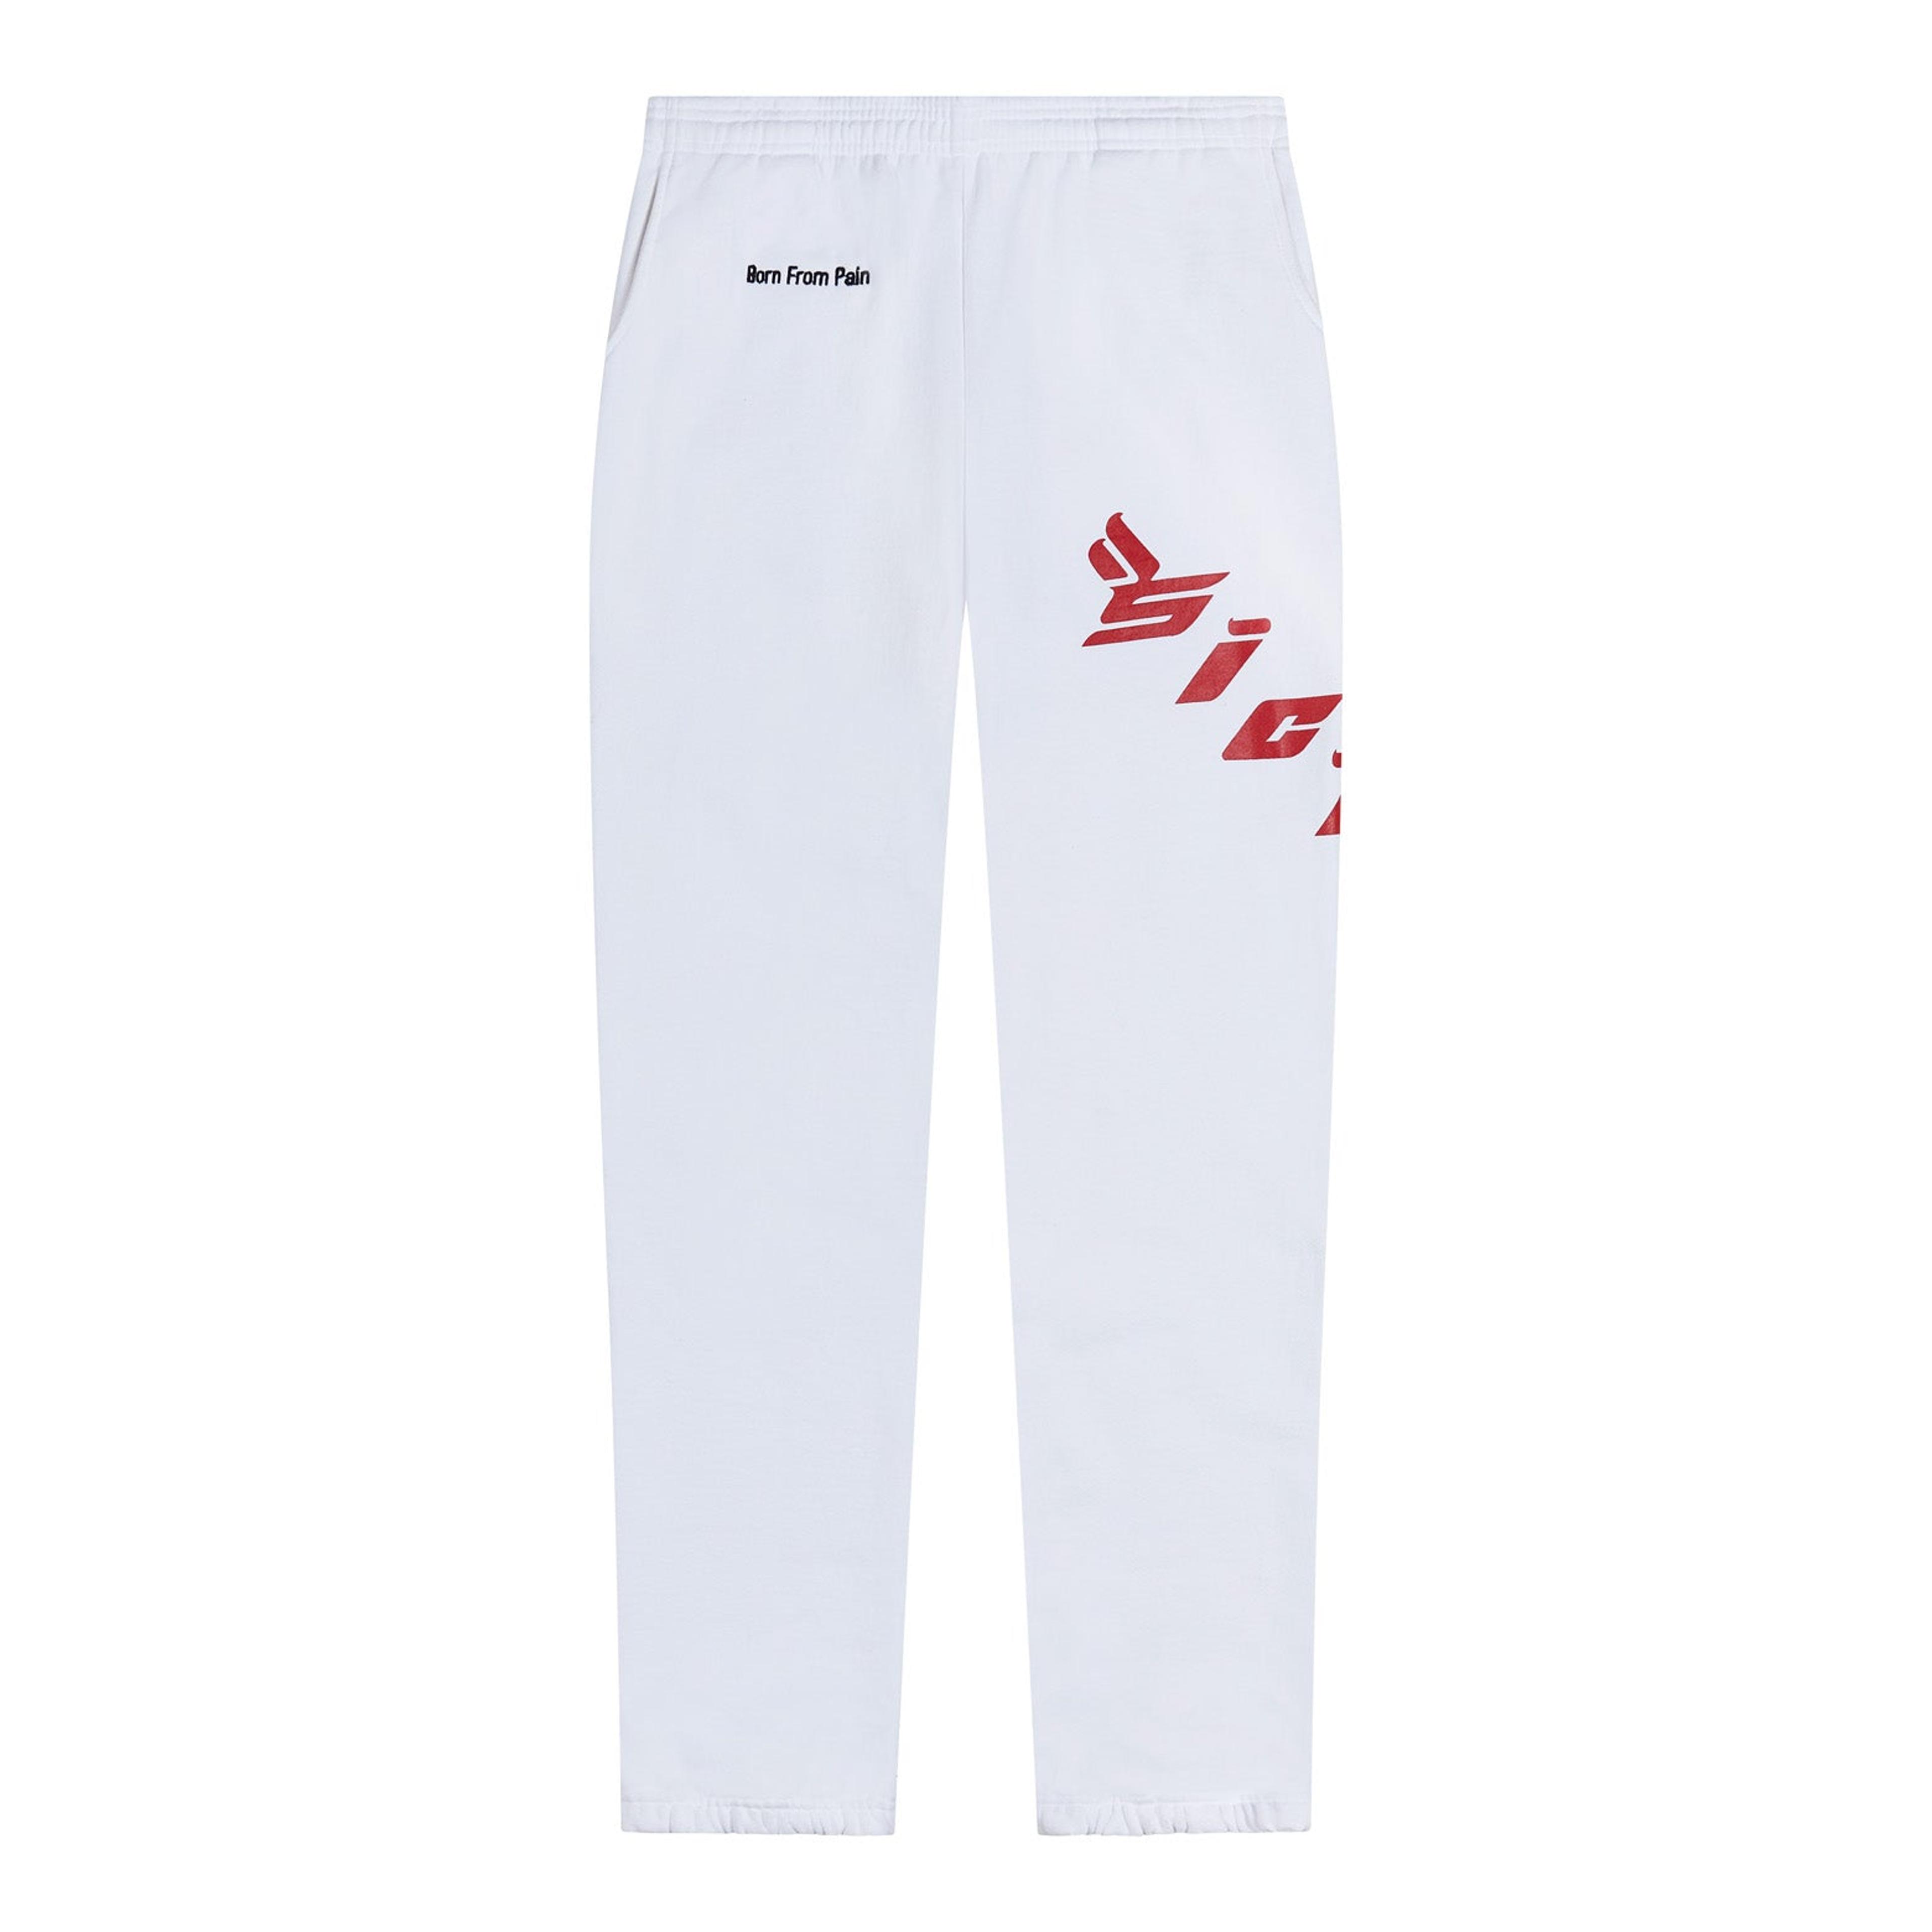 Alternate View 1 of Born From Pain Sweatpants - White